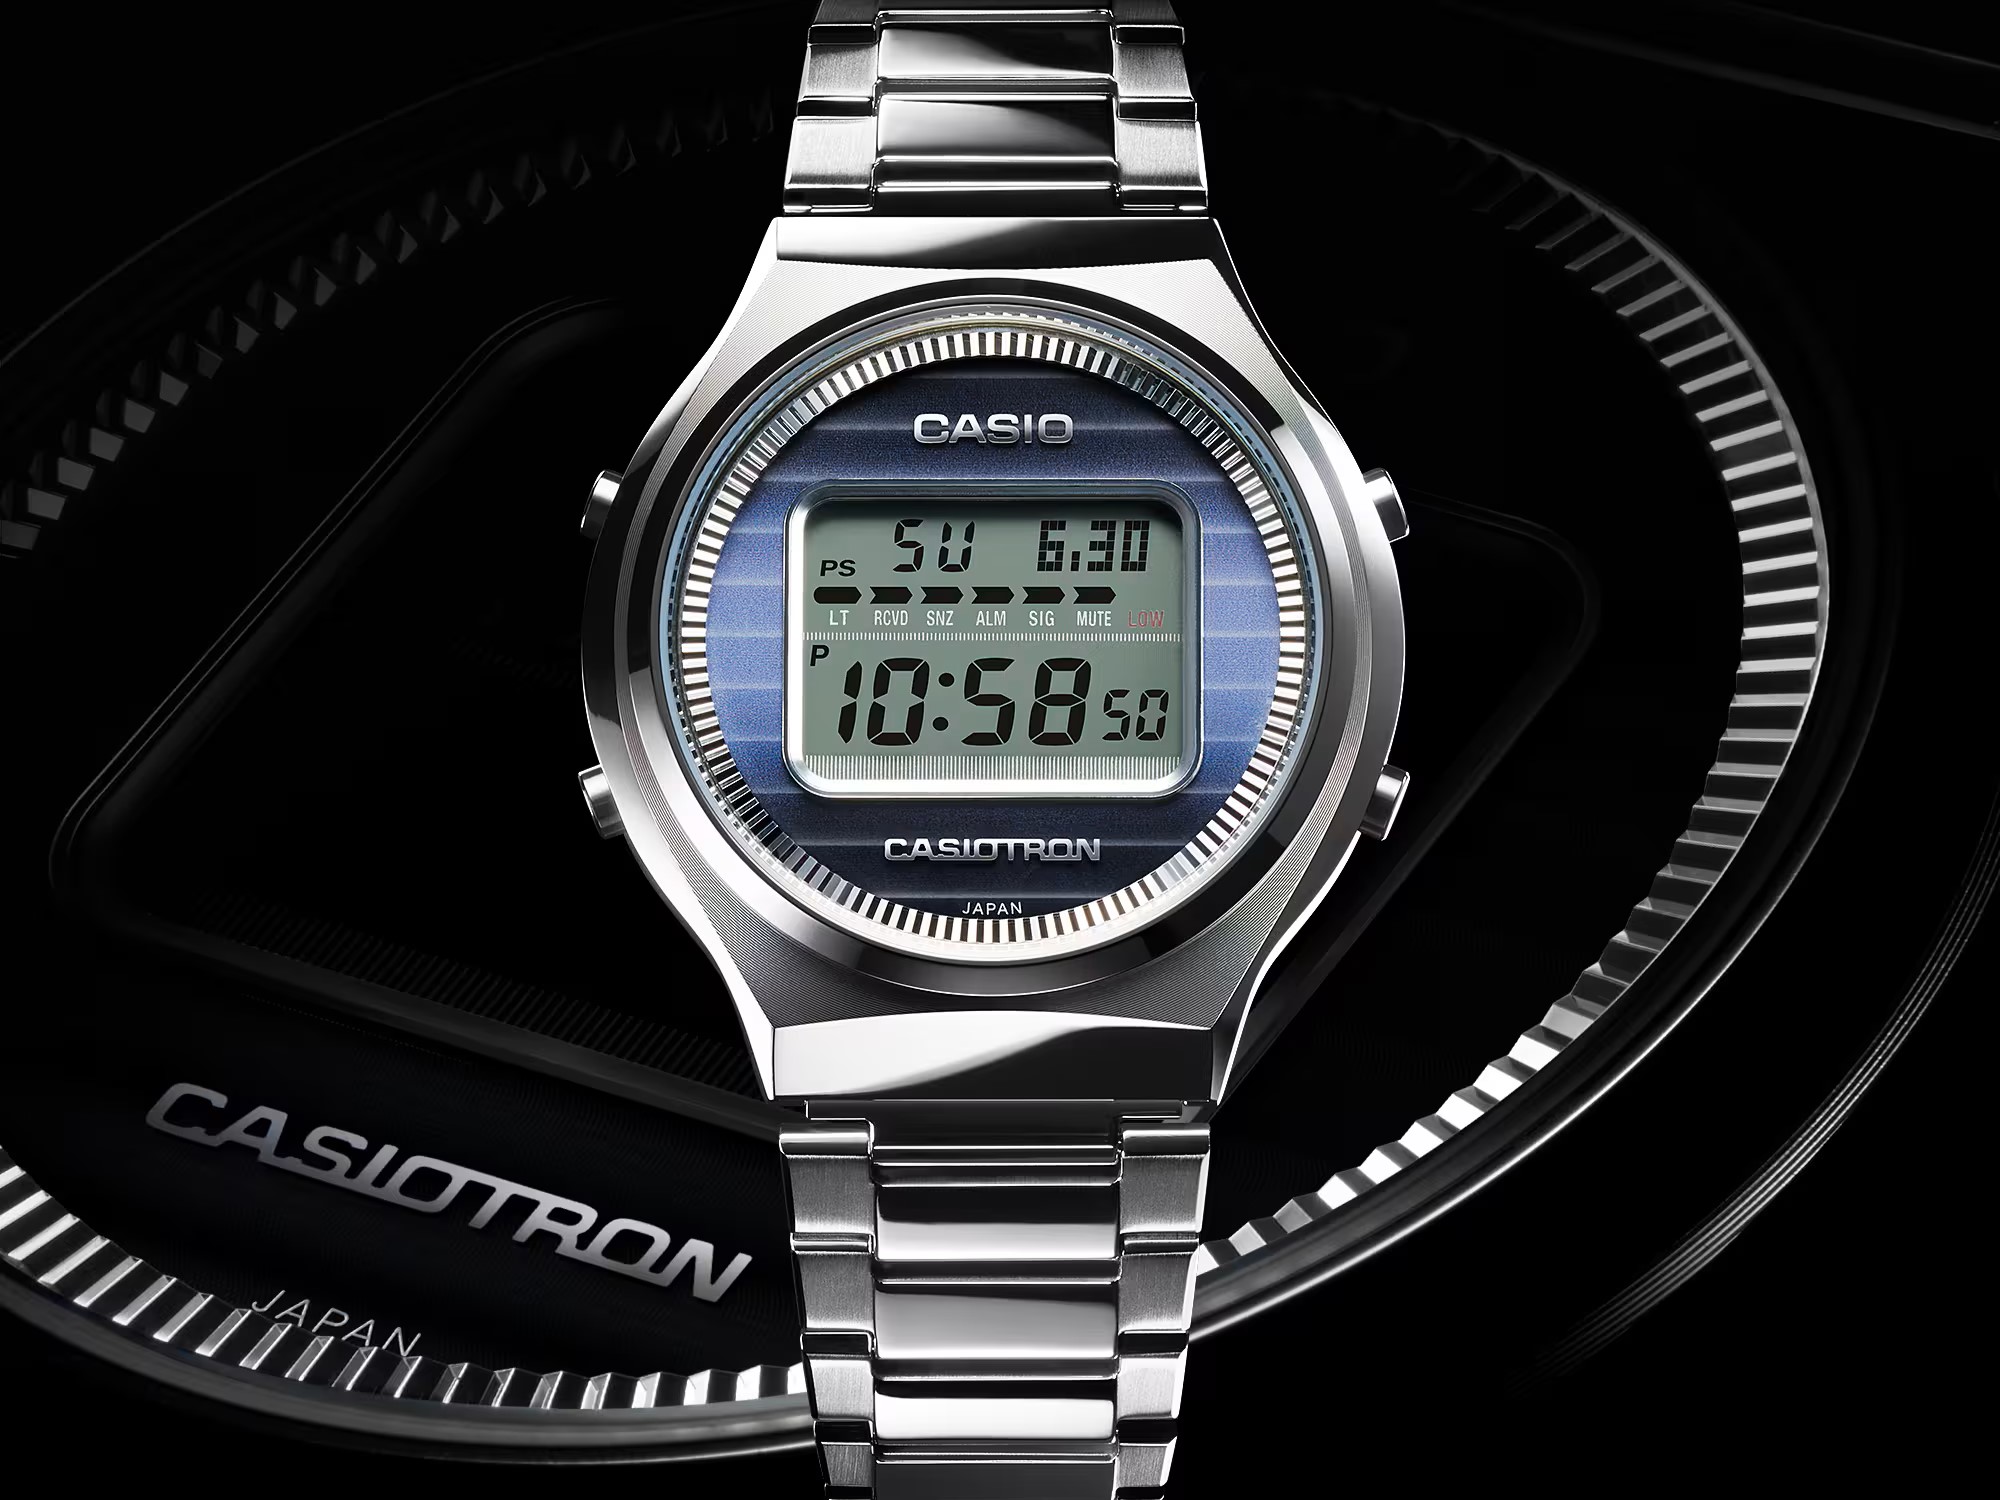 Casio Celebrates 50 Years With Limited-Edition Reissue Of Iconic Casiotron Watch